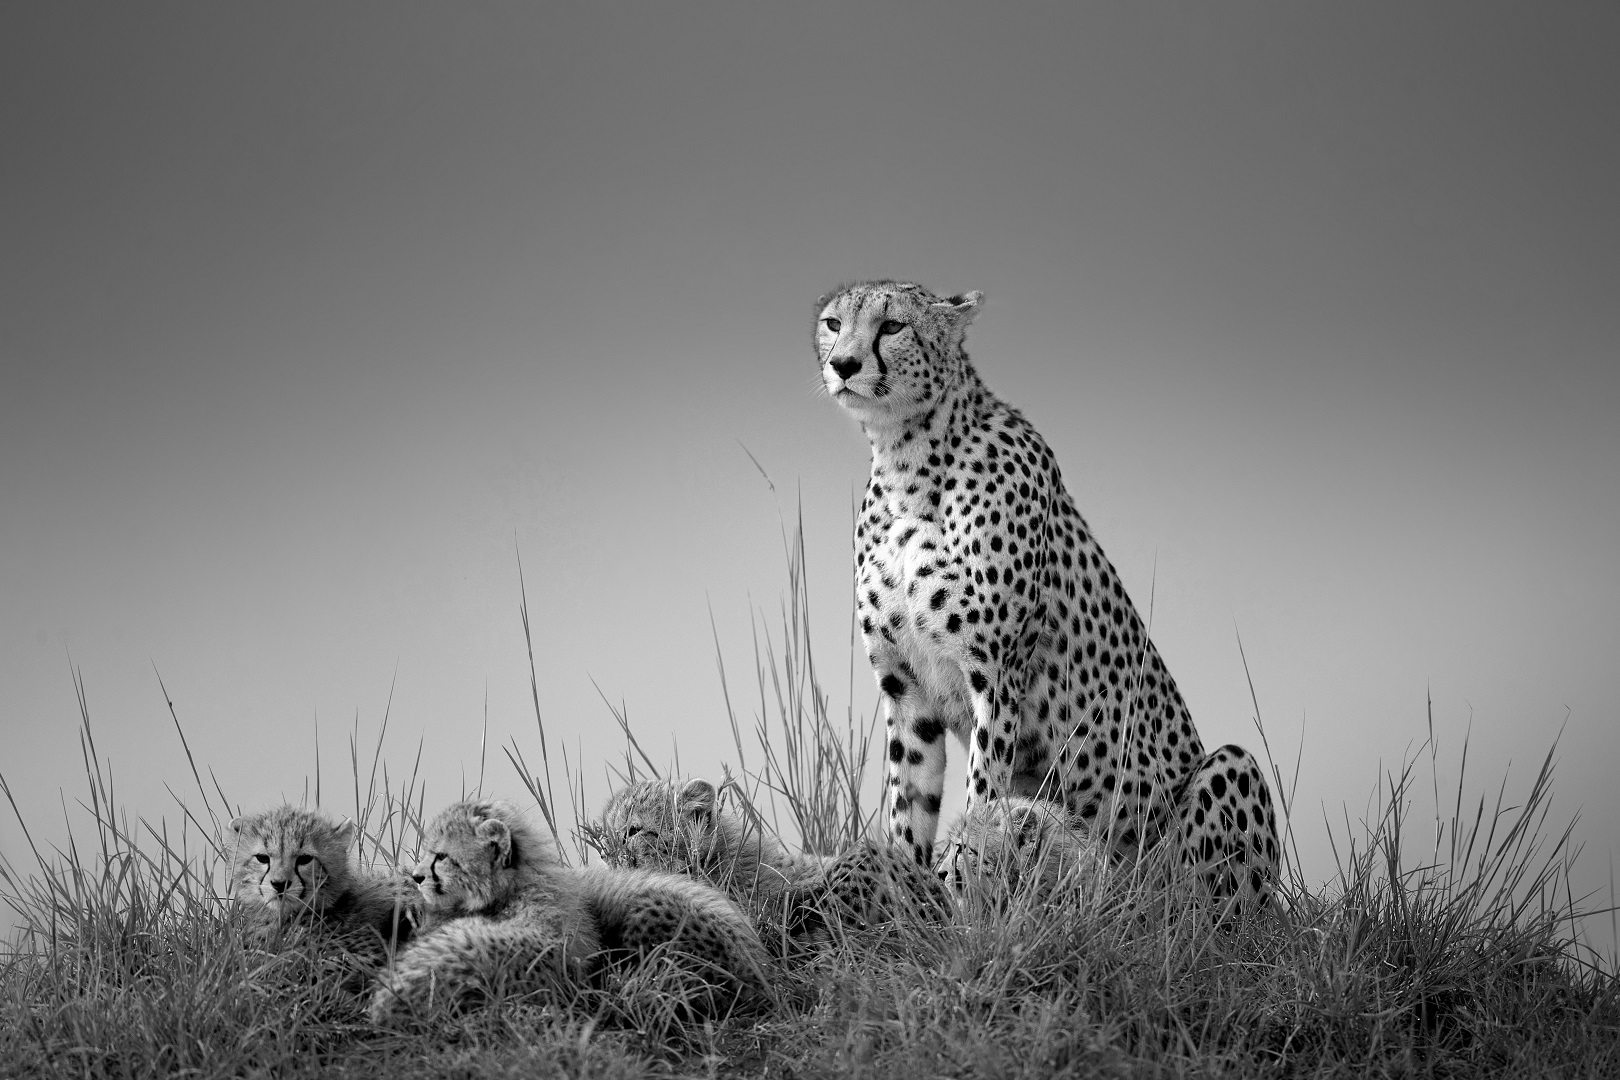 Absolute winner of the Black and White Photo Awards 2022 - Johan Willems - Cheetah with cubs